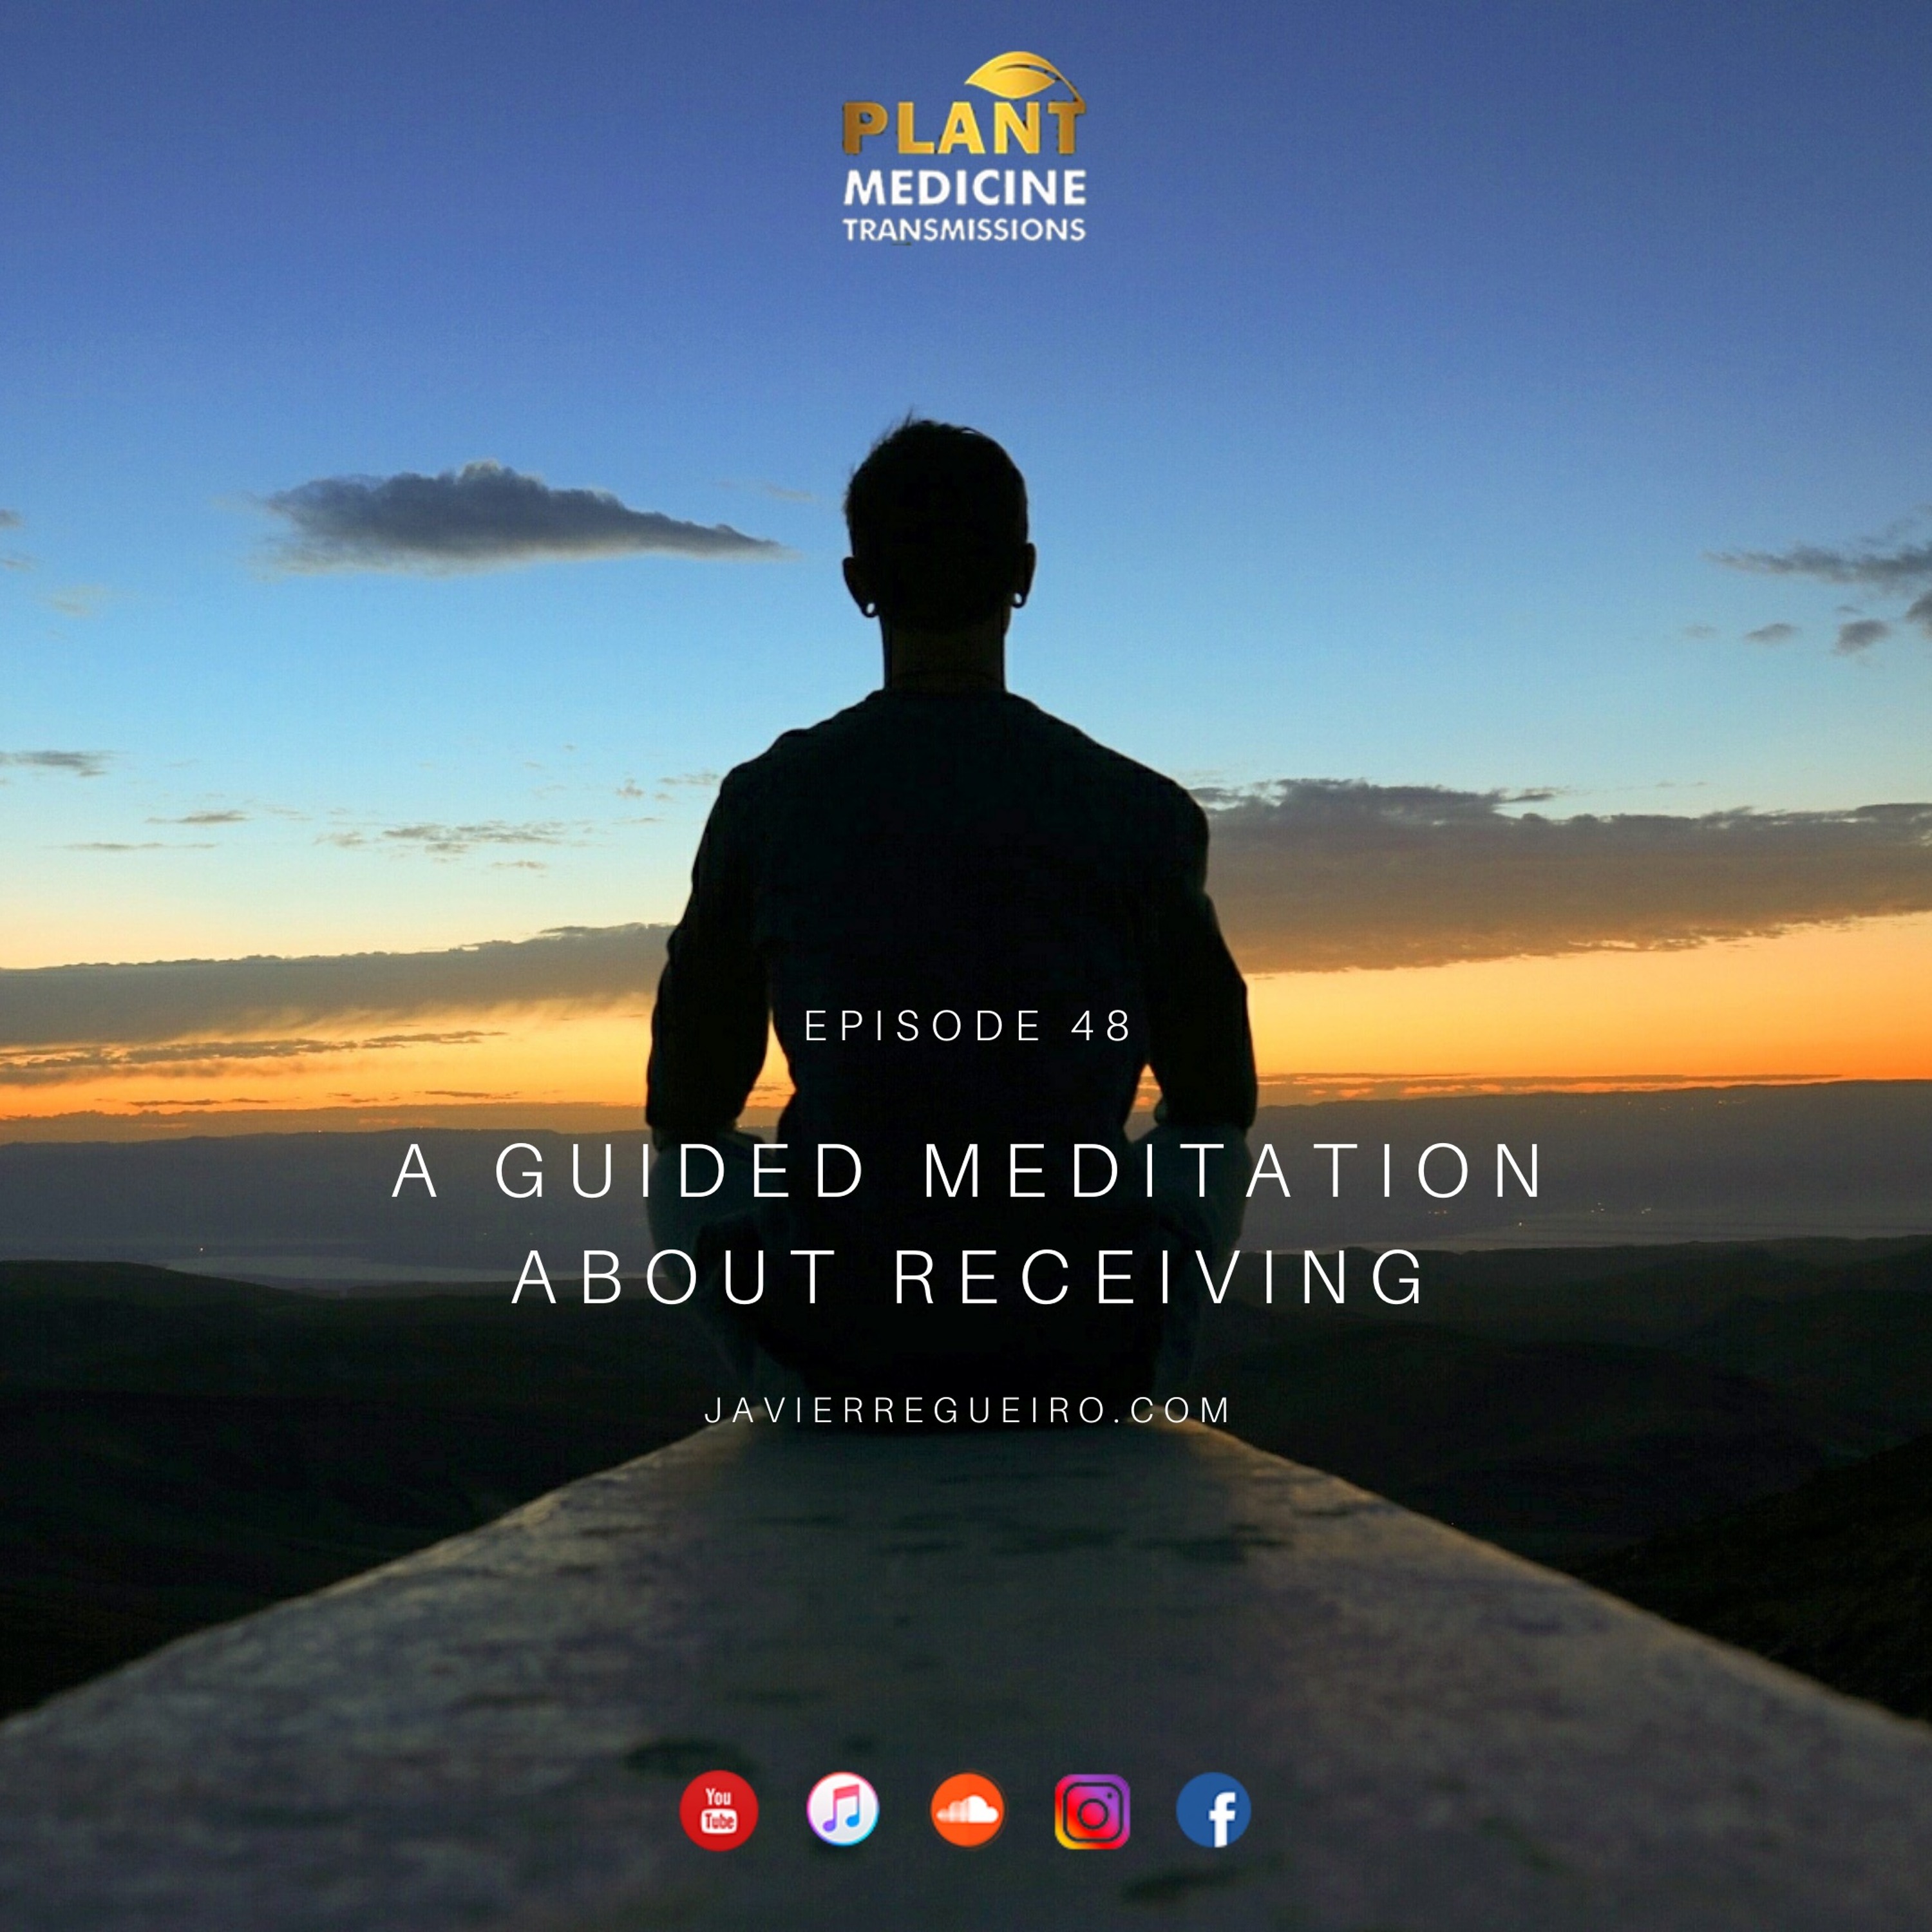 # 48: A GUIDED MEDITATION ABOUT RECEIVING